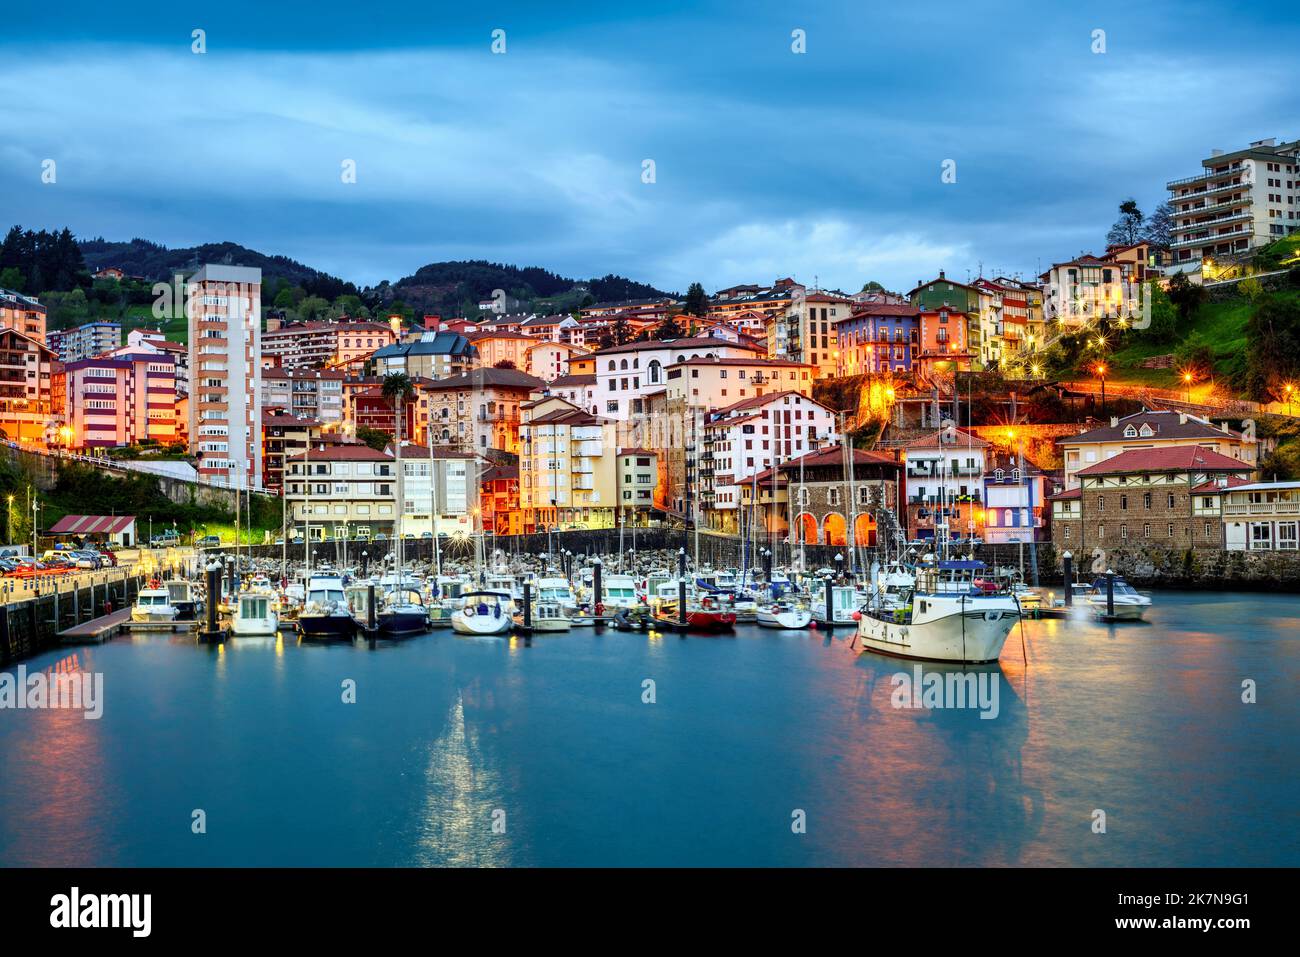 The picturesque port of Mutriku town, Gipuzkoa province, Basque Country, Spain Stock Photo